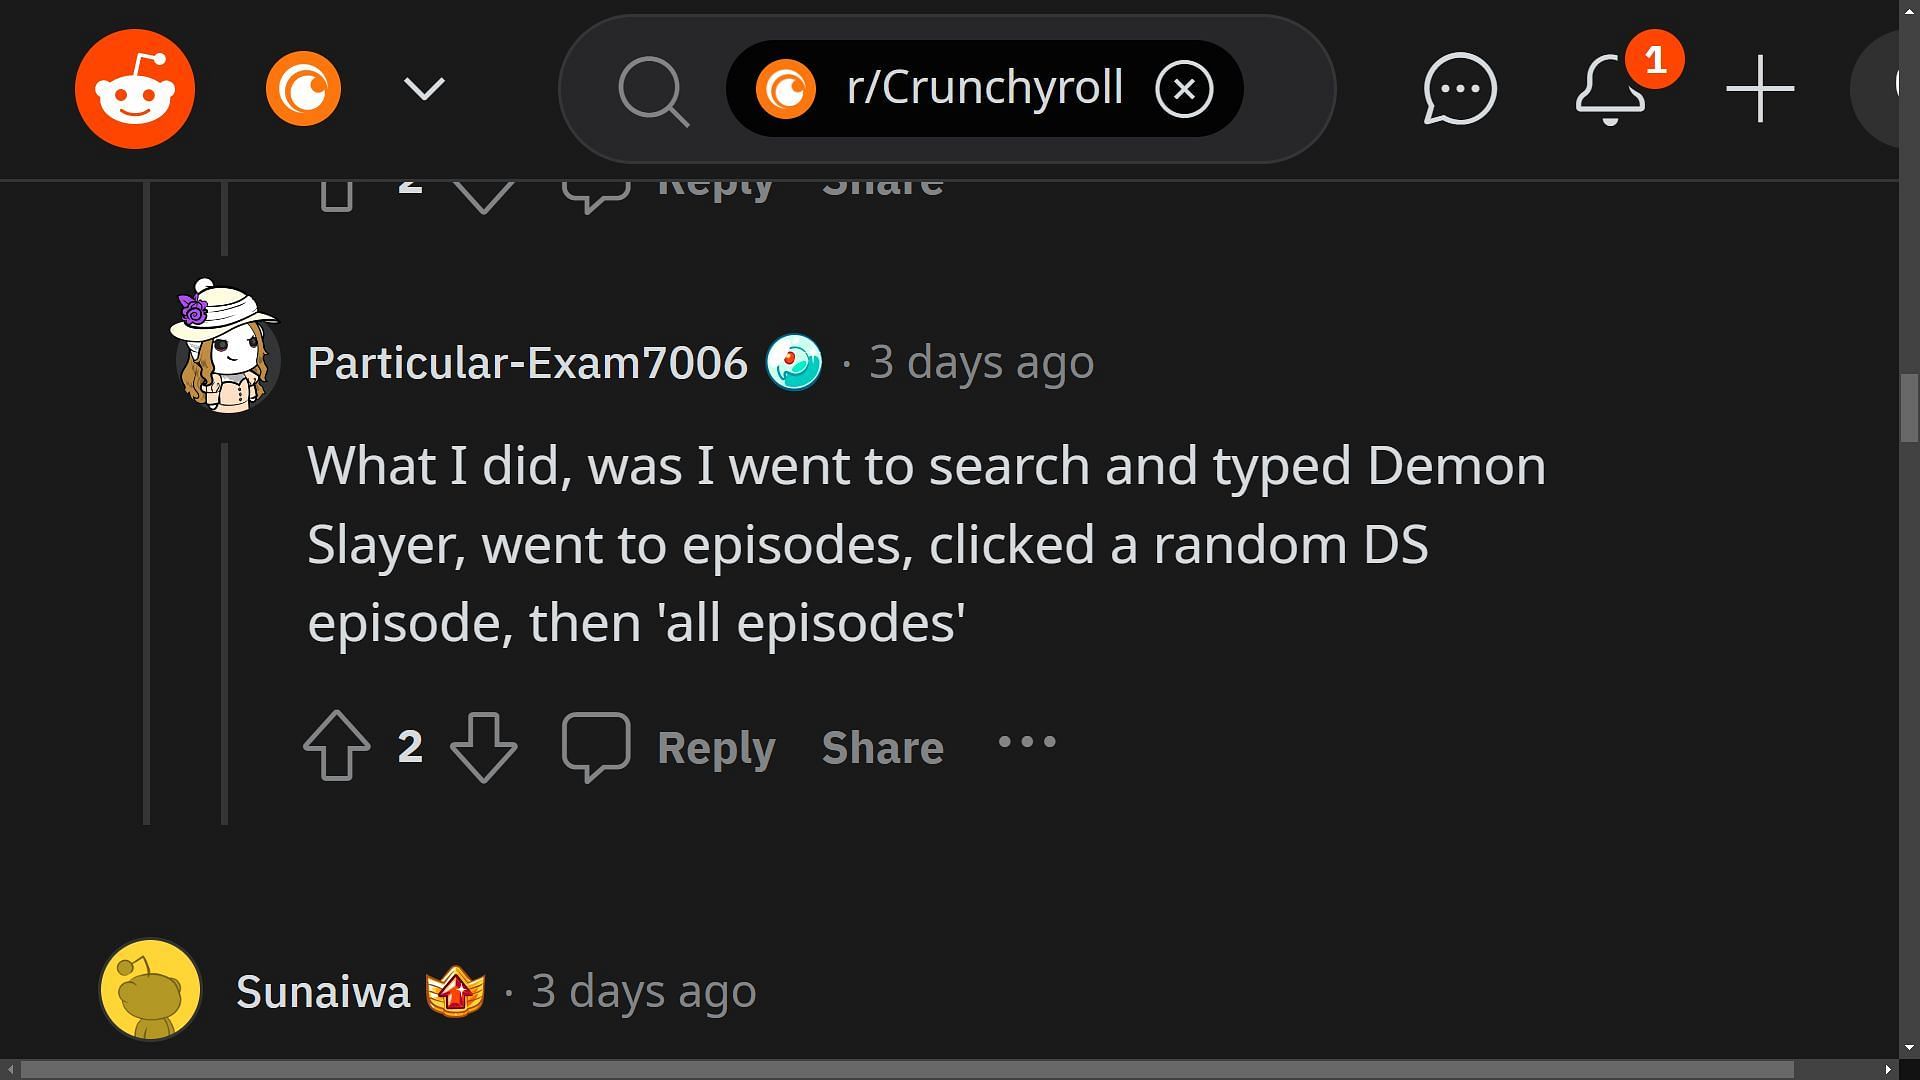 Why is Demon slayer not on Crunchyroll for many? Absence explained